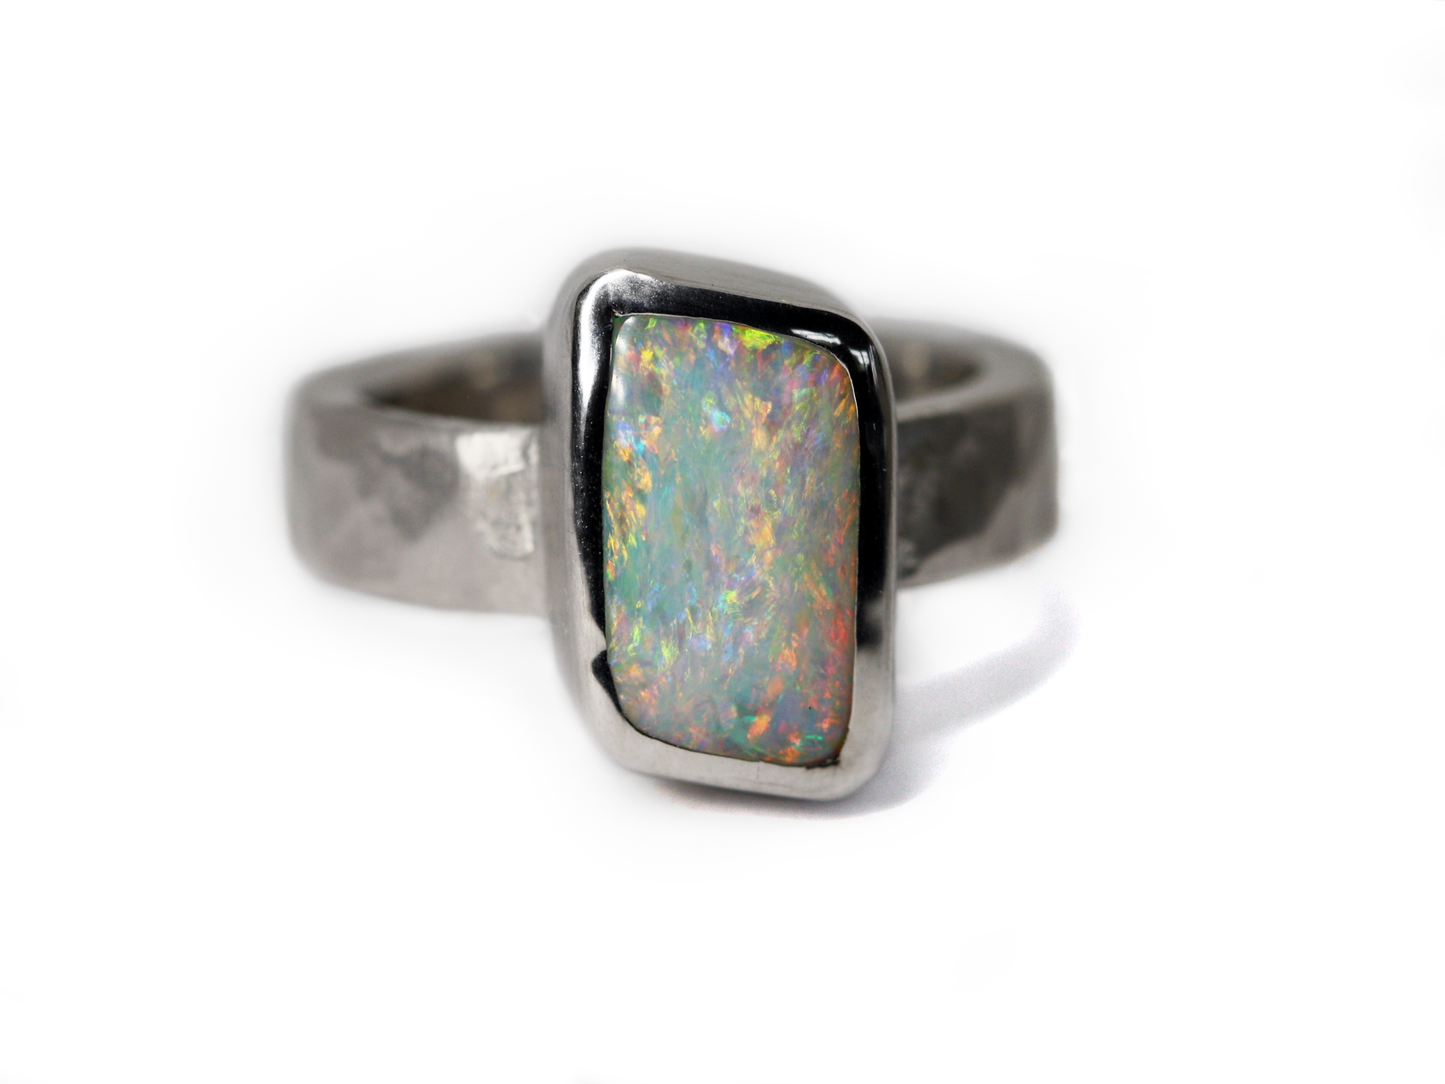 Queensland Boulder Opal Sterling Silver Ring. Light opal hand crafted in Brisbane Studio using ethically sourced materials. Wide textured band with a hammered finish. Stone is white pink and green. 